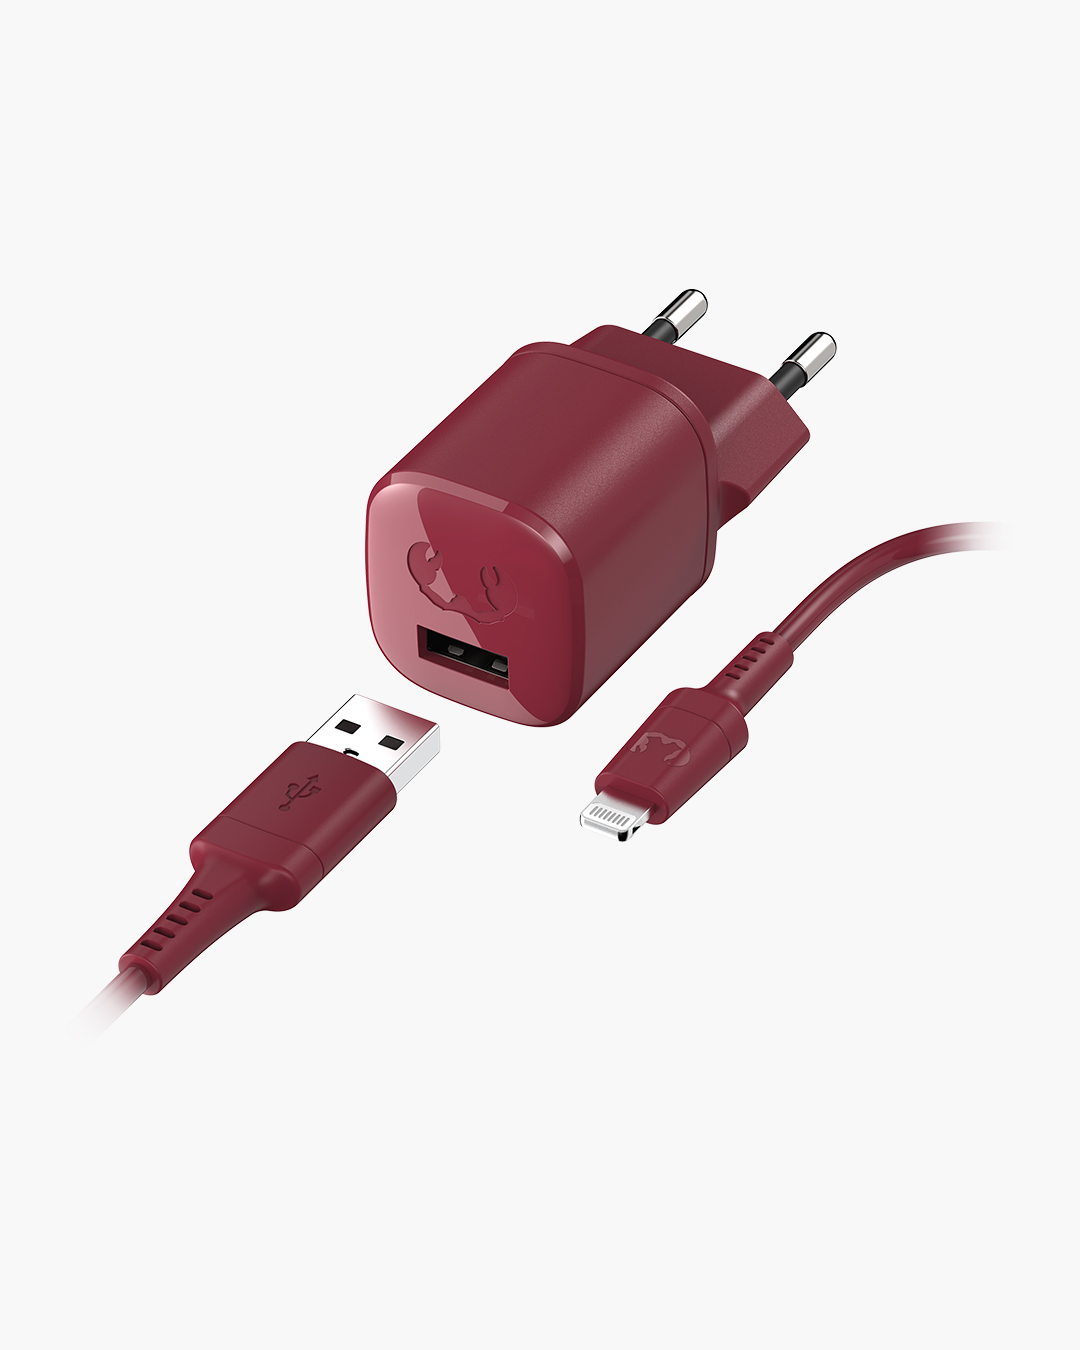 Fresh 'n Rebel - USB Mini Charger 12W + Apple Lightning Cable 1,5m - Ruby Red